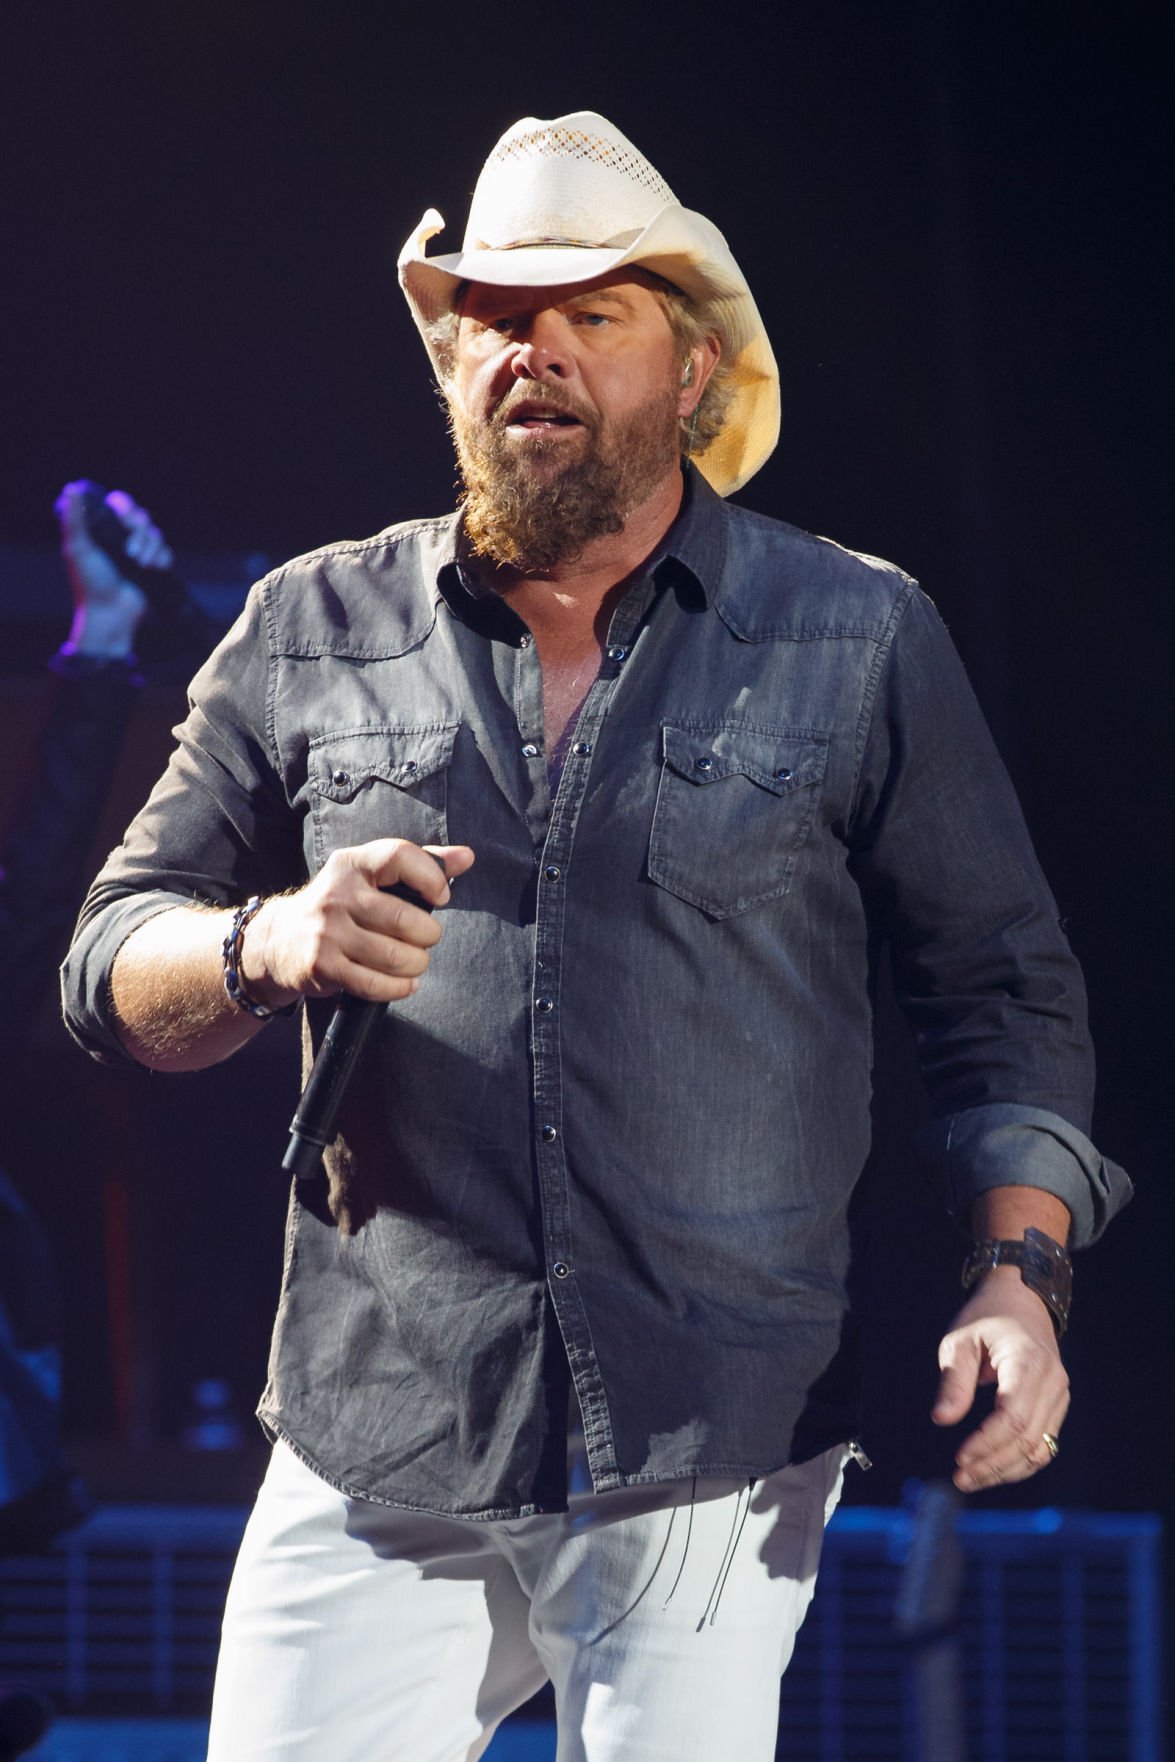 Photo Gallery: Toby Keith brings big show to BOK Center | Slideshows ...